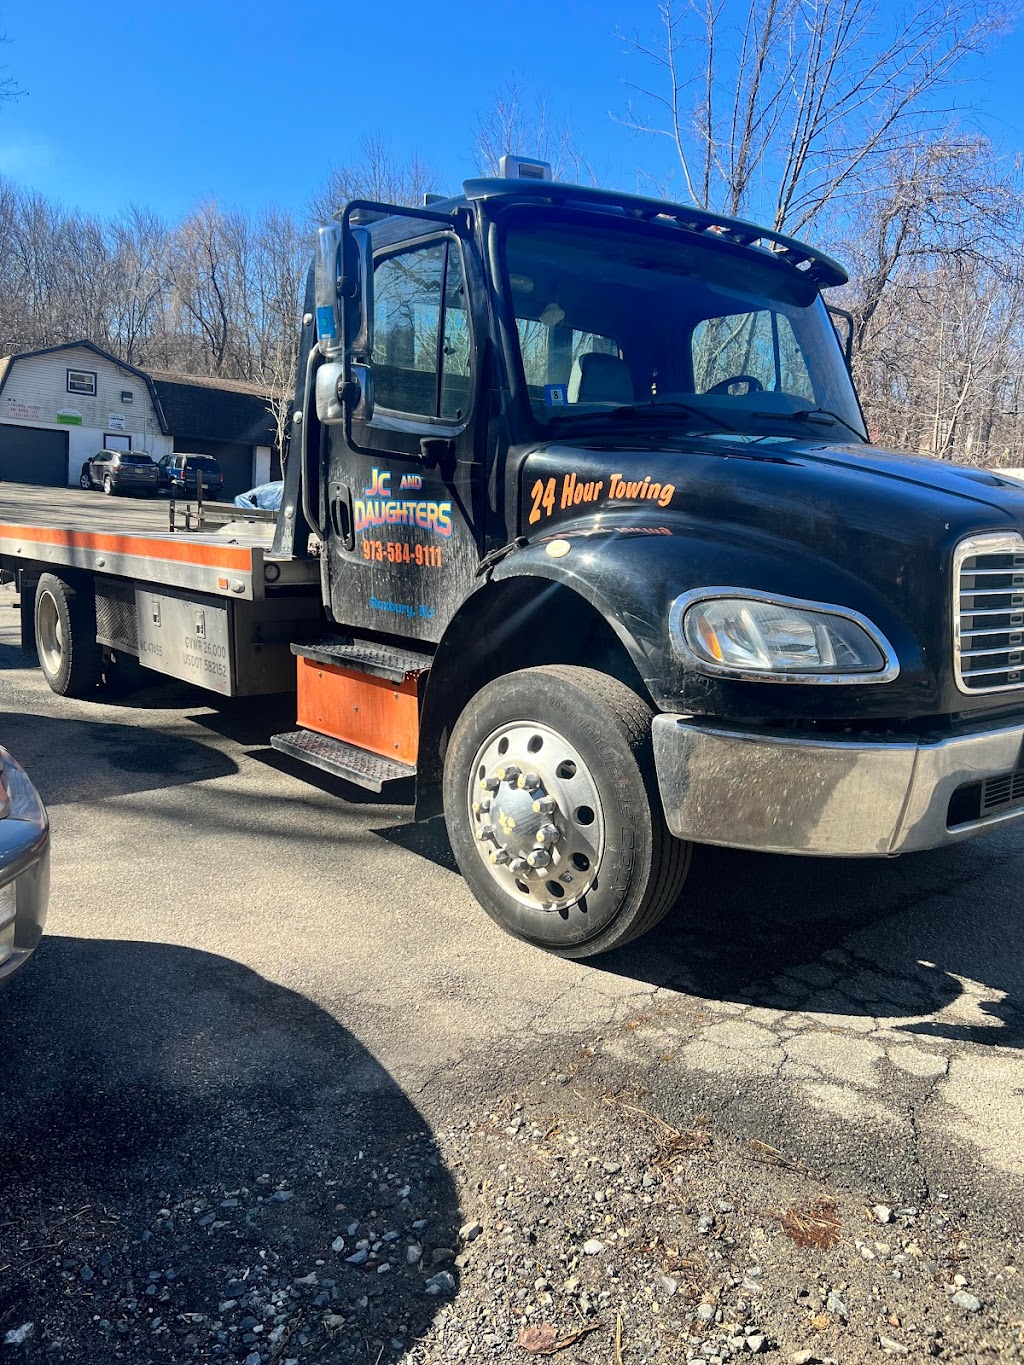 JC and Daughters 24-Hour Towing, Inc | 1856 US-46, Ledgewood, NJ 07852 | Phone: (973) 584-9111